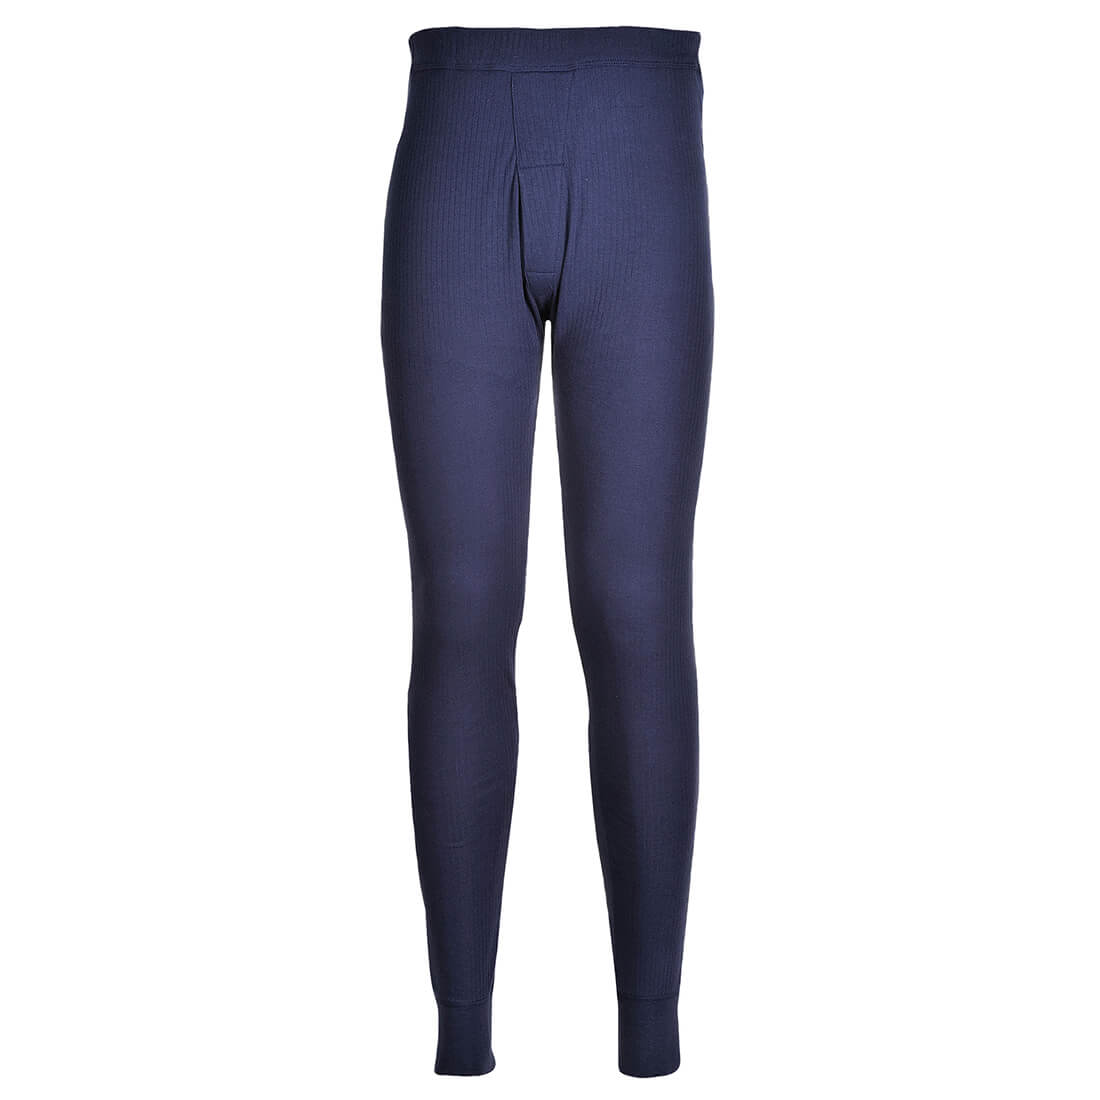 Image of Portwest Thermal Trousers Navy 5XL